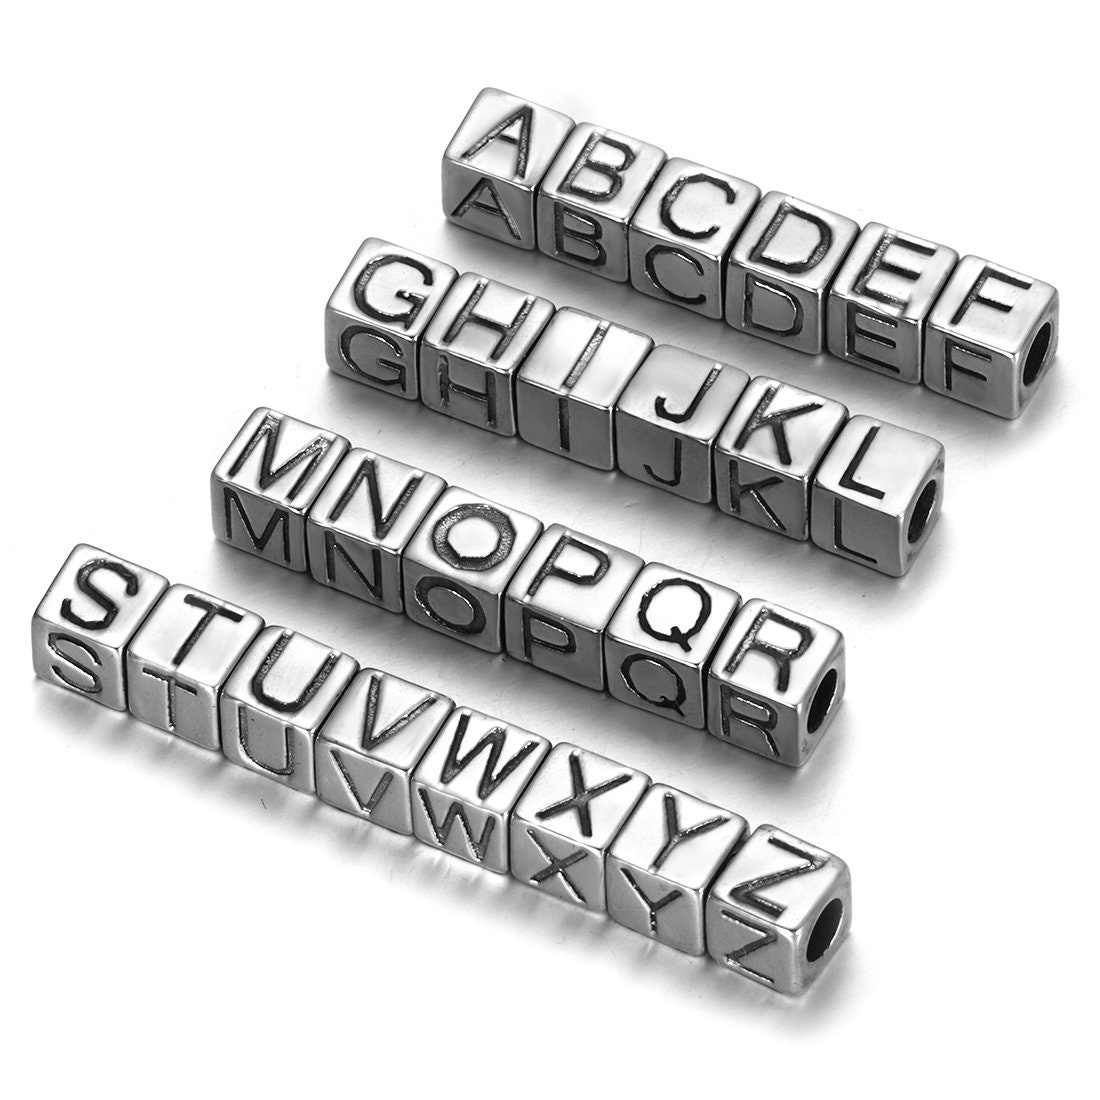 DICOSMETIC 288pcs 36 Styles 304 Stainless Steel Alphabet Charms Letter A-Z Pendants Number 0-9 Charms Initial Letter Charms Small